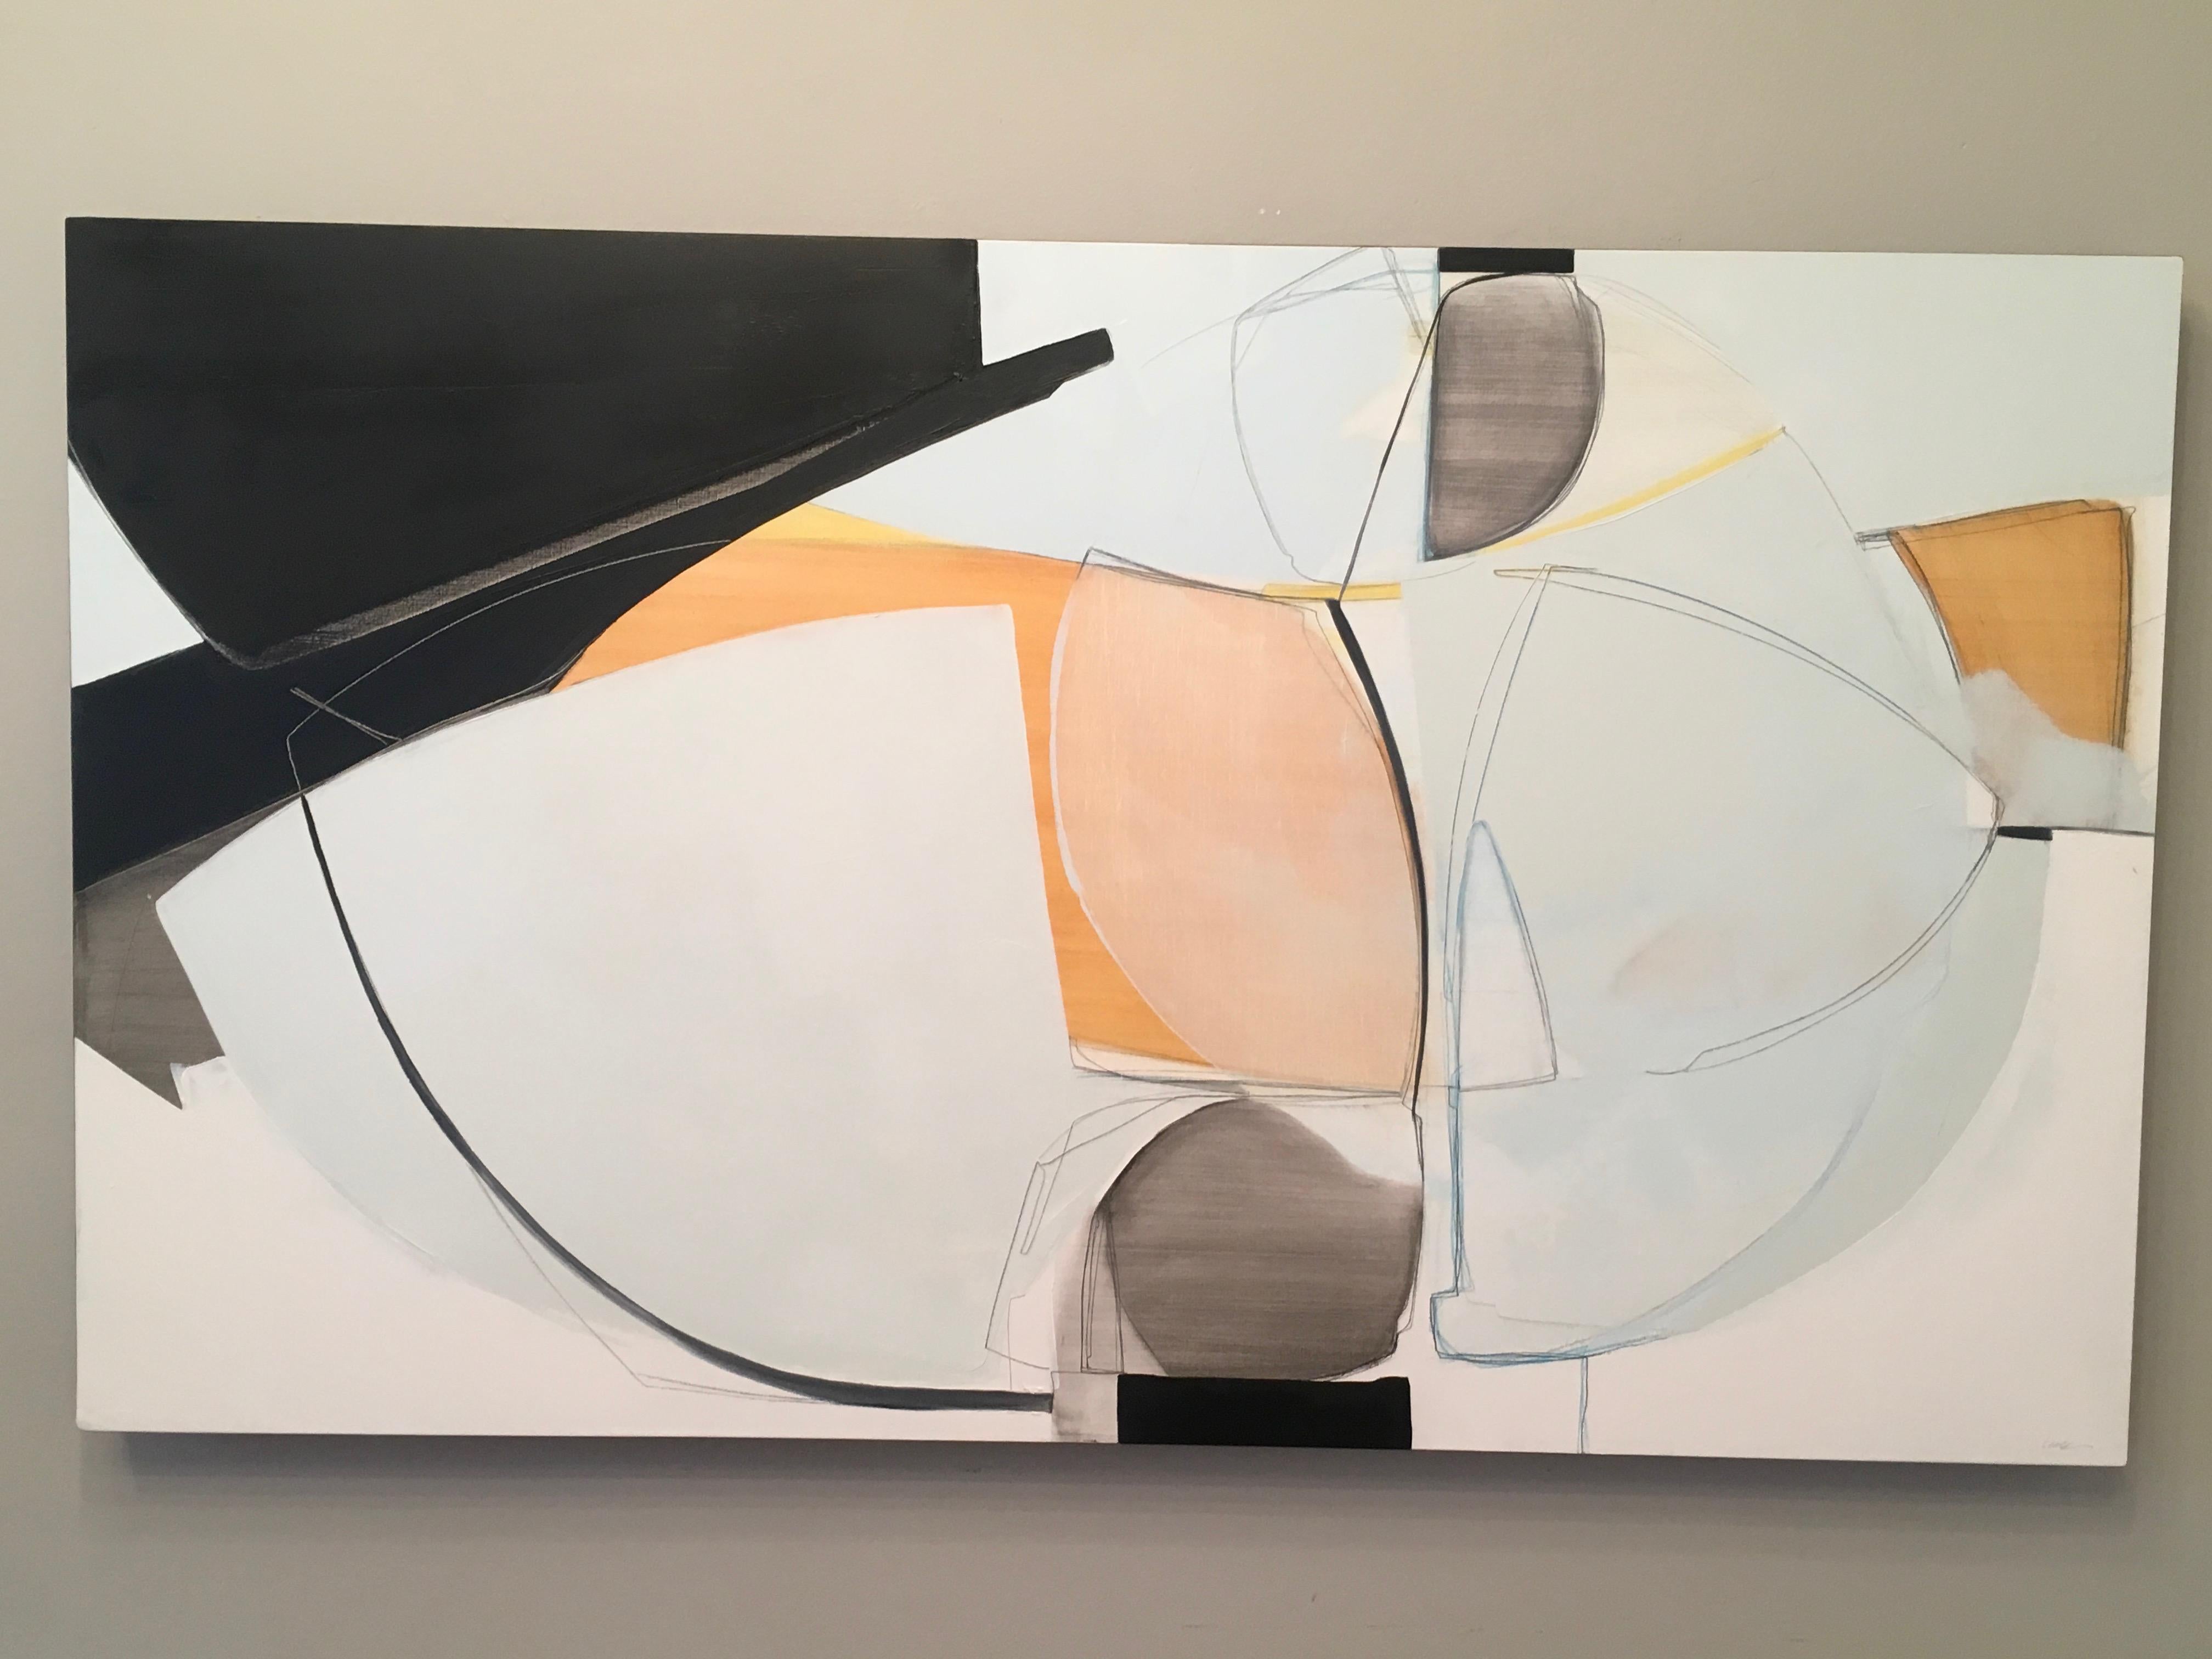 Two Aloof by Rose Umerlik is an abstract painting, Oil and Graphite on wood panel, 28 x 48 x 1.5.  The edges are covered with a linen tape and most clients do not frame the artwork.

Rose Umerlik extracts the intangible emotional moments that live